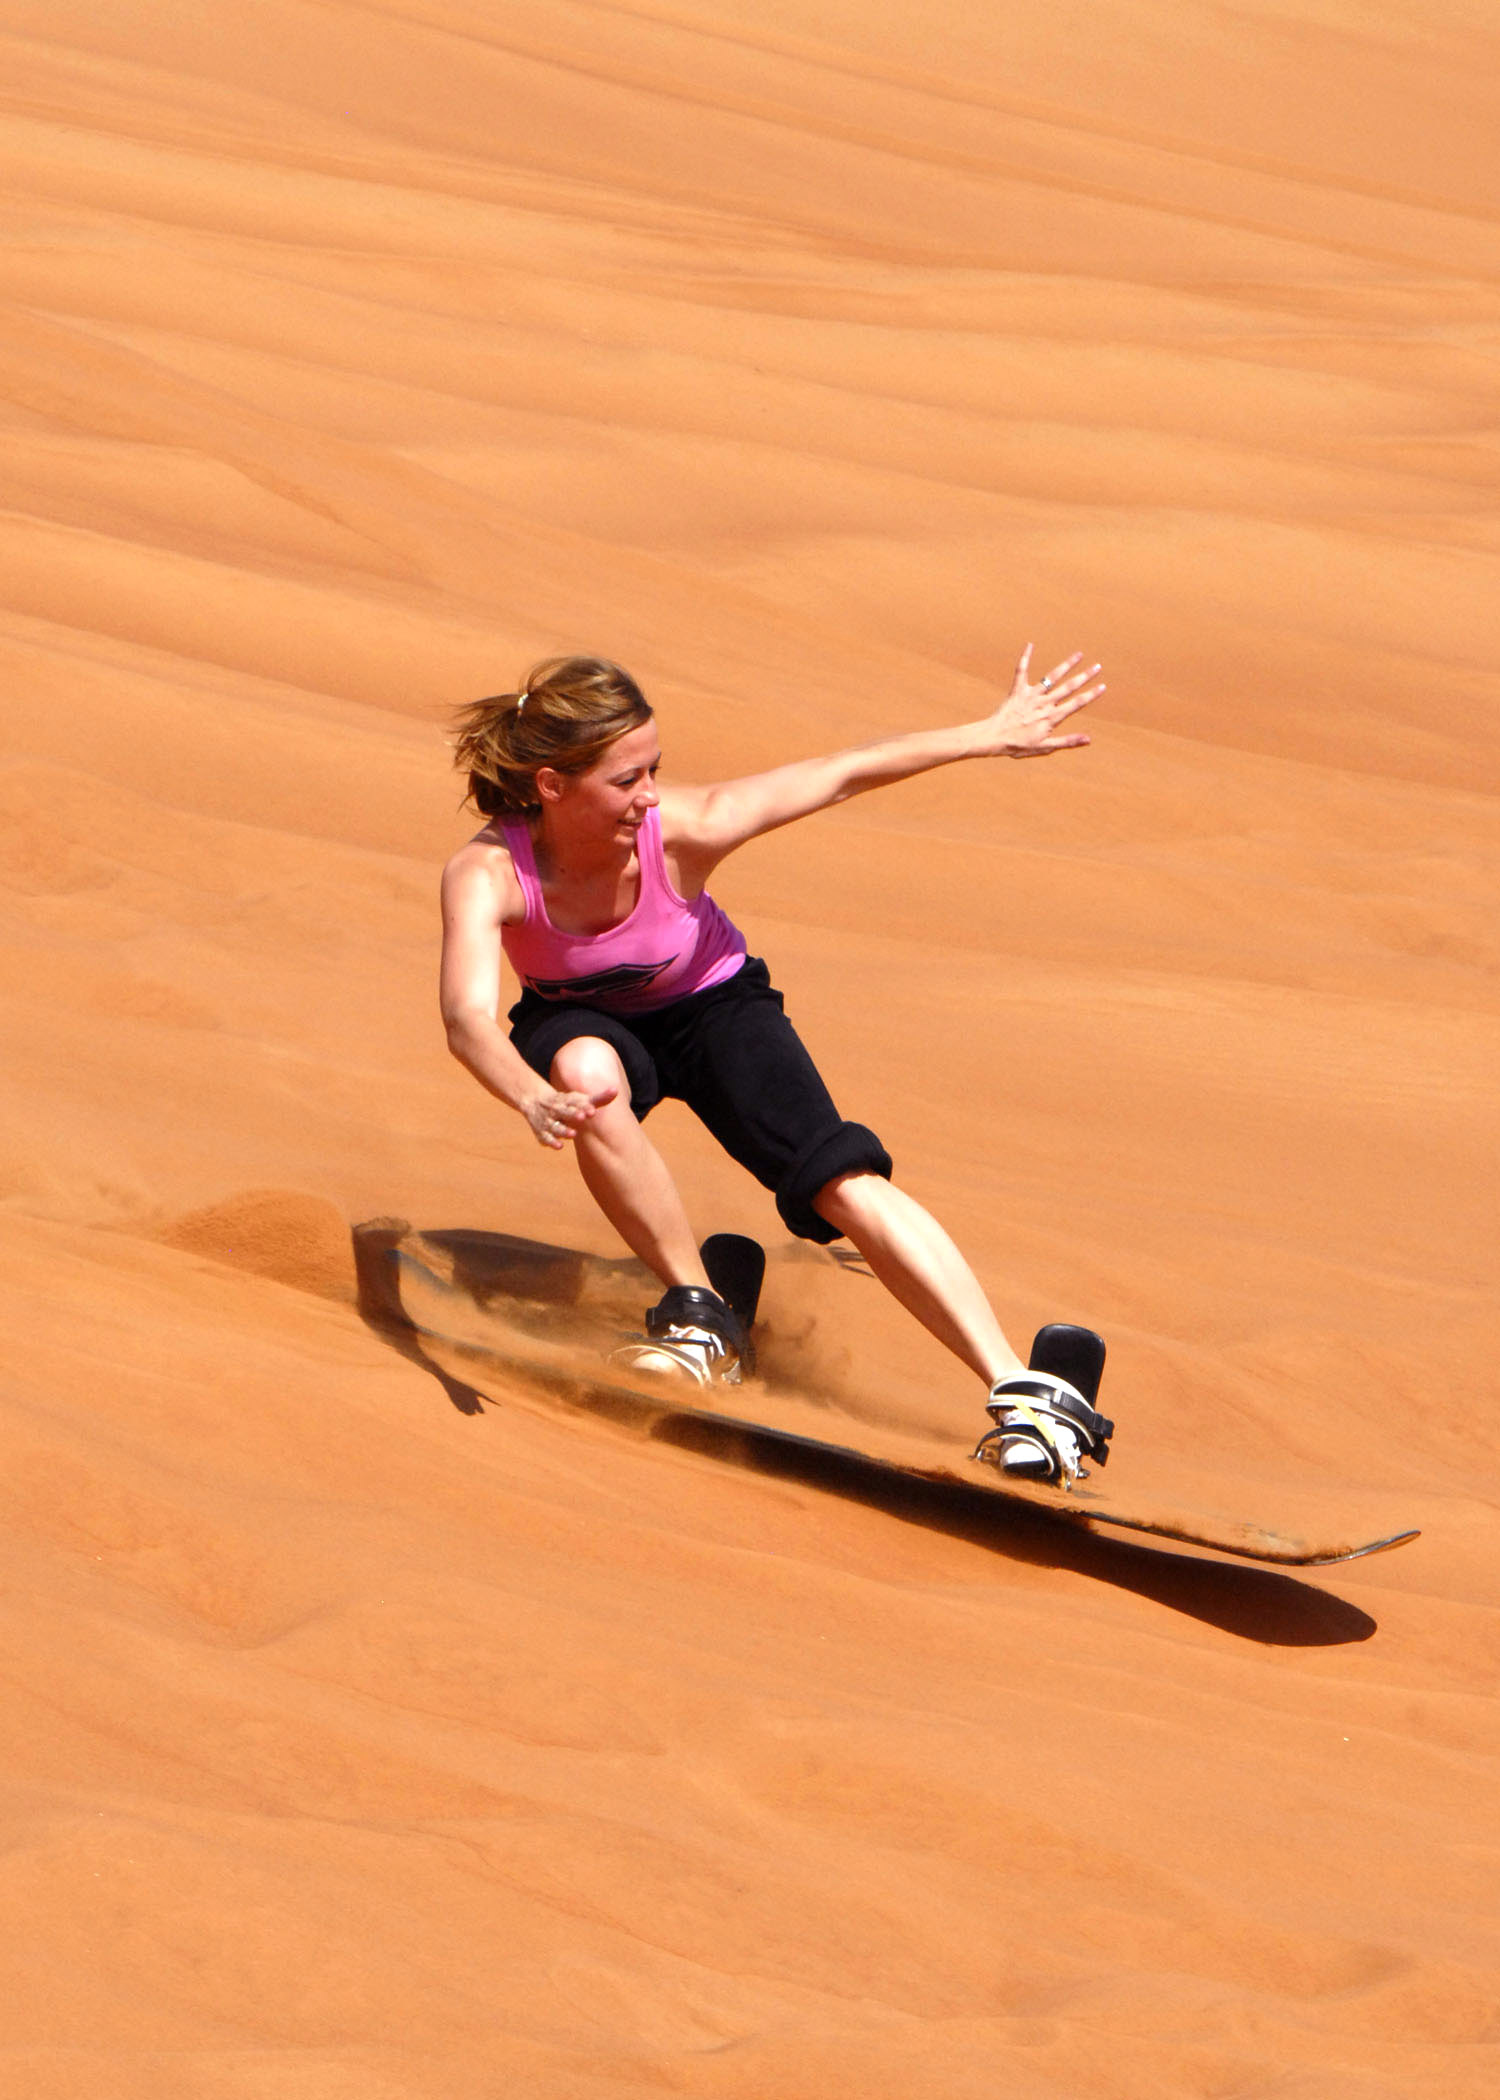 Sand Boarding Experience